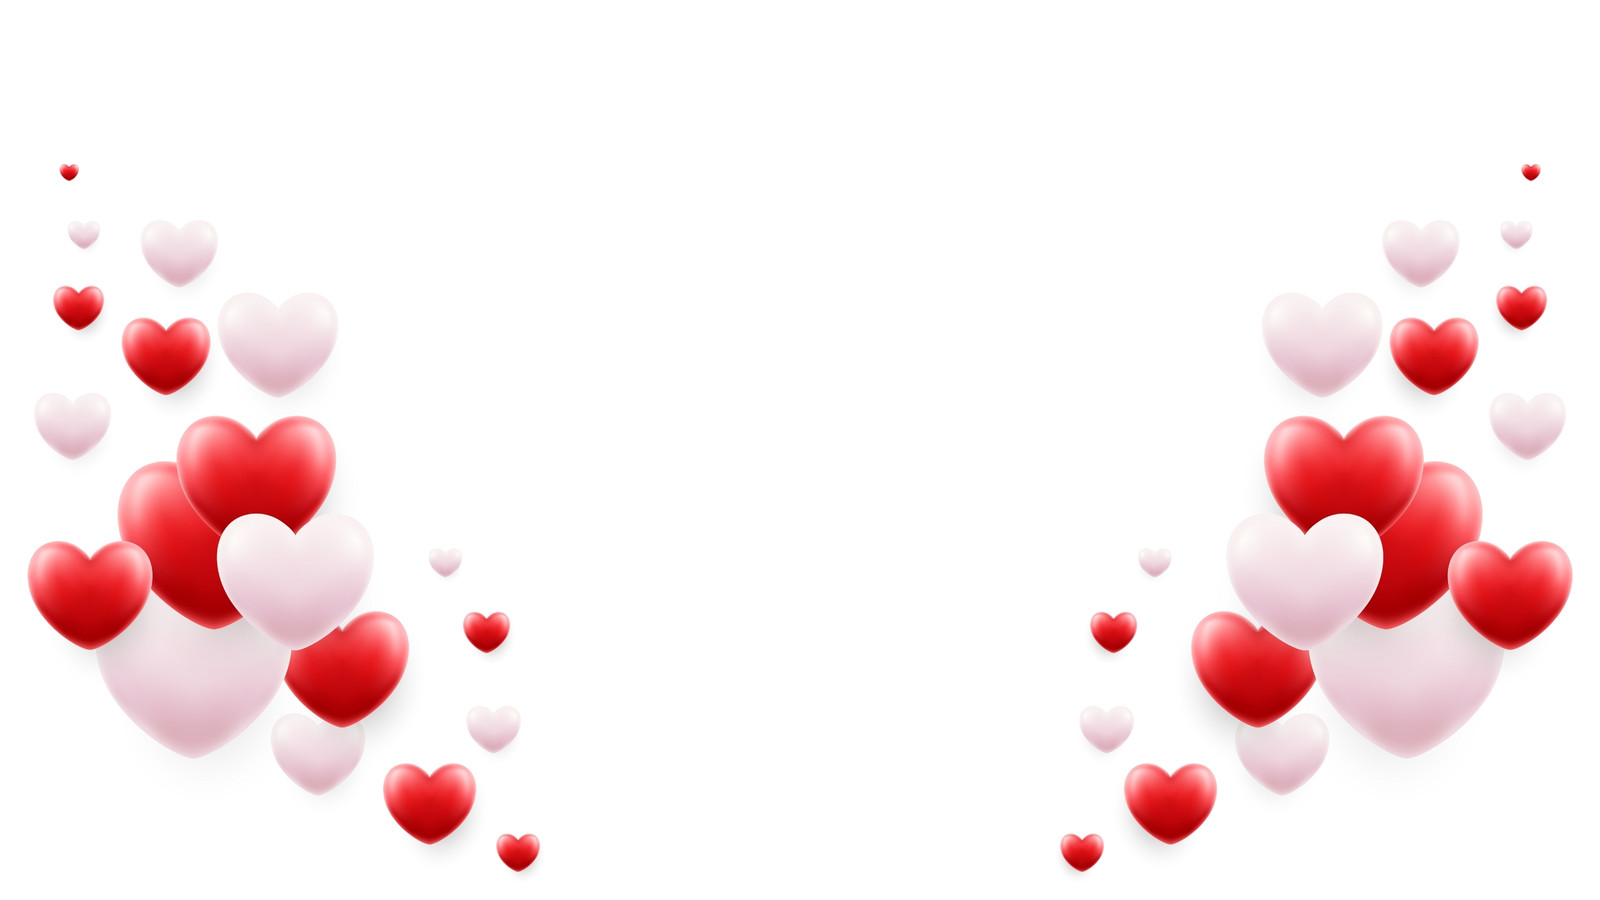 45 Virtual Valentine's Day Zoom Backgrounds - Free Download - The Bash